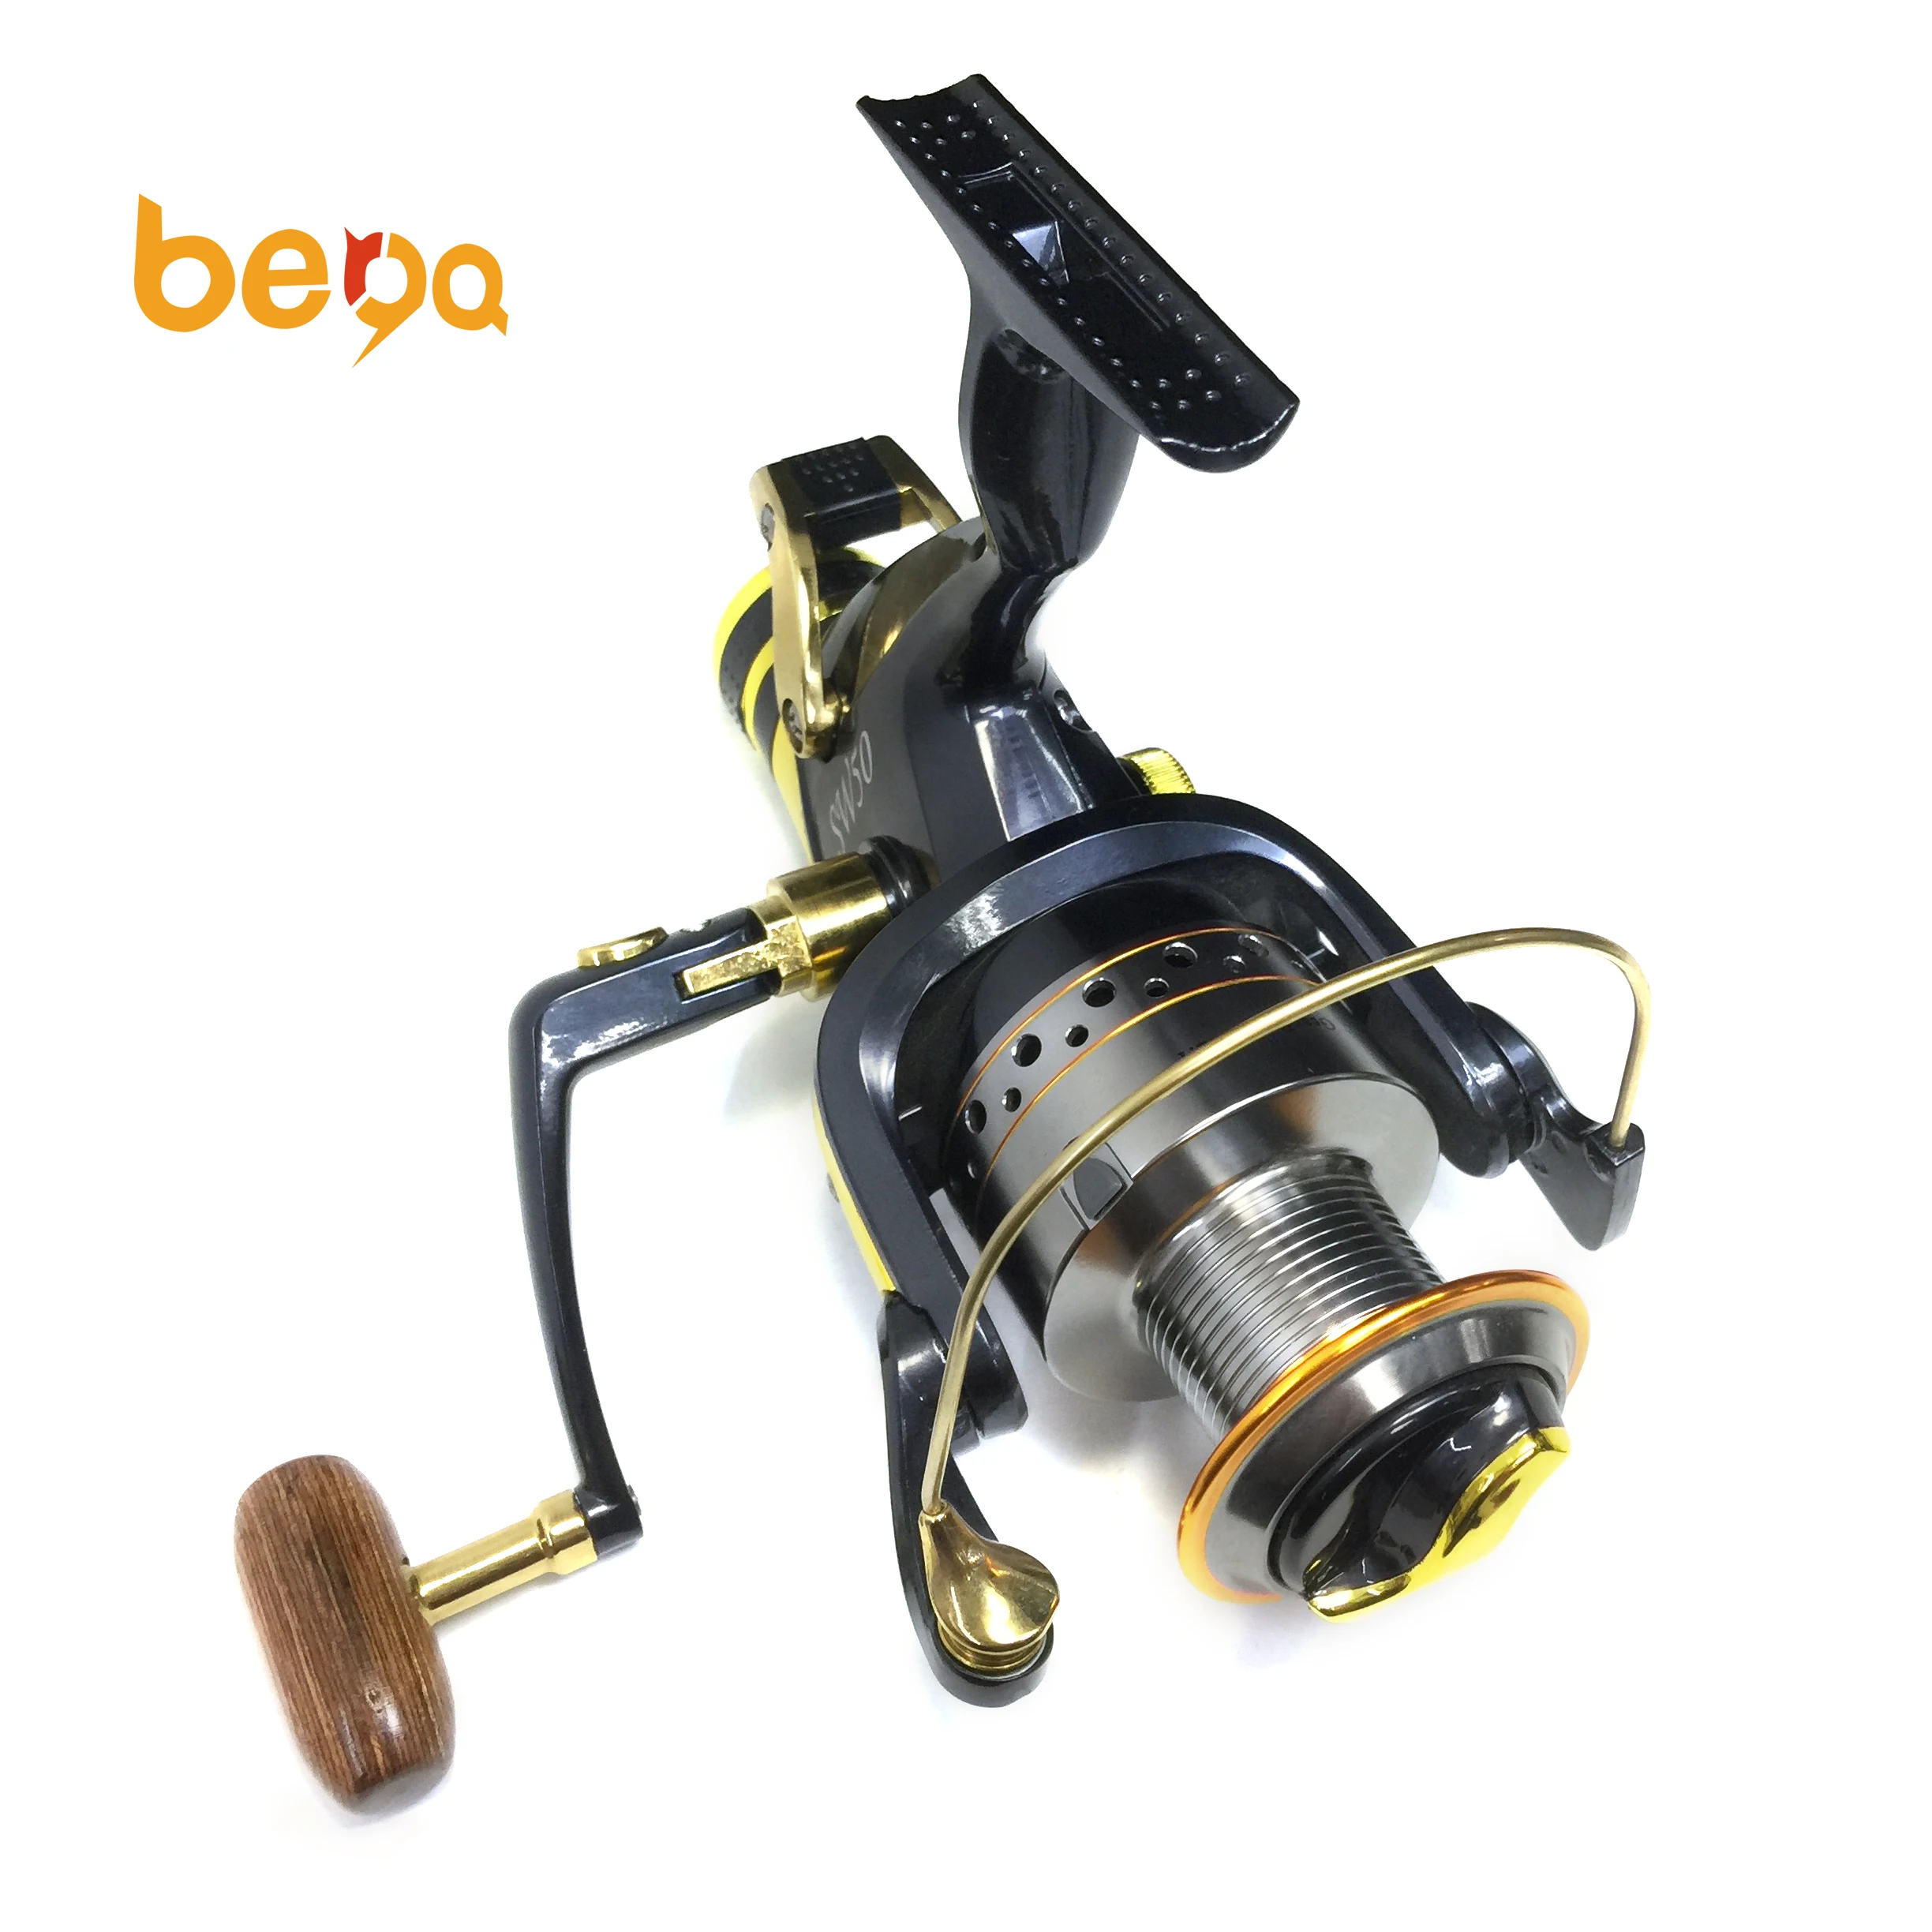 

9+1BB Front Release And Rear Release Force Double Brake 5000 6000 Fishing Tackle For Carp Double Loading Spinning Fishing Reels, Gray, customizable